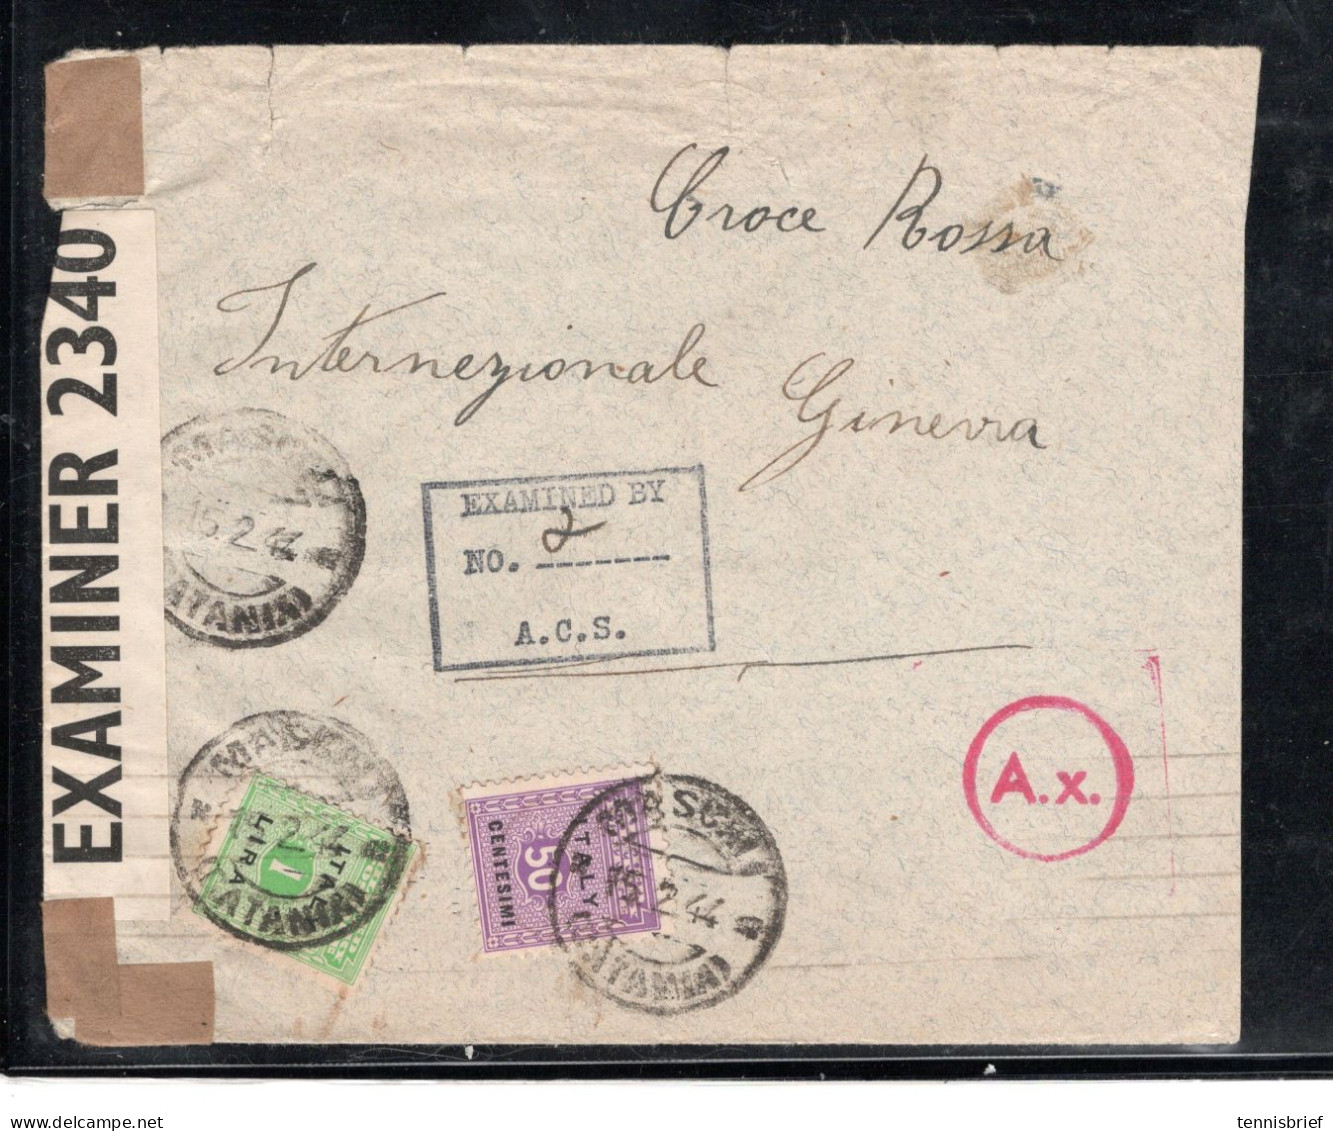 1944 ,50 C.and 1 Lira, Commercial Cover To Red Crosss ,Geneve, Switzerland ,Censor USA And German Censor ,Rare !   #190 - Marcophilie